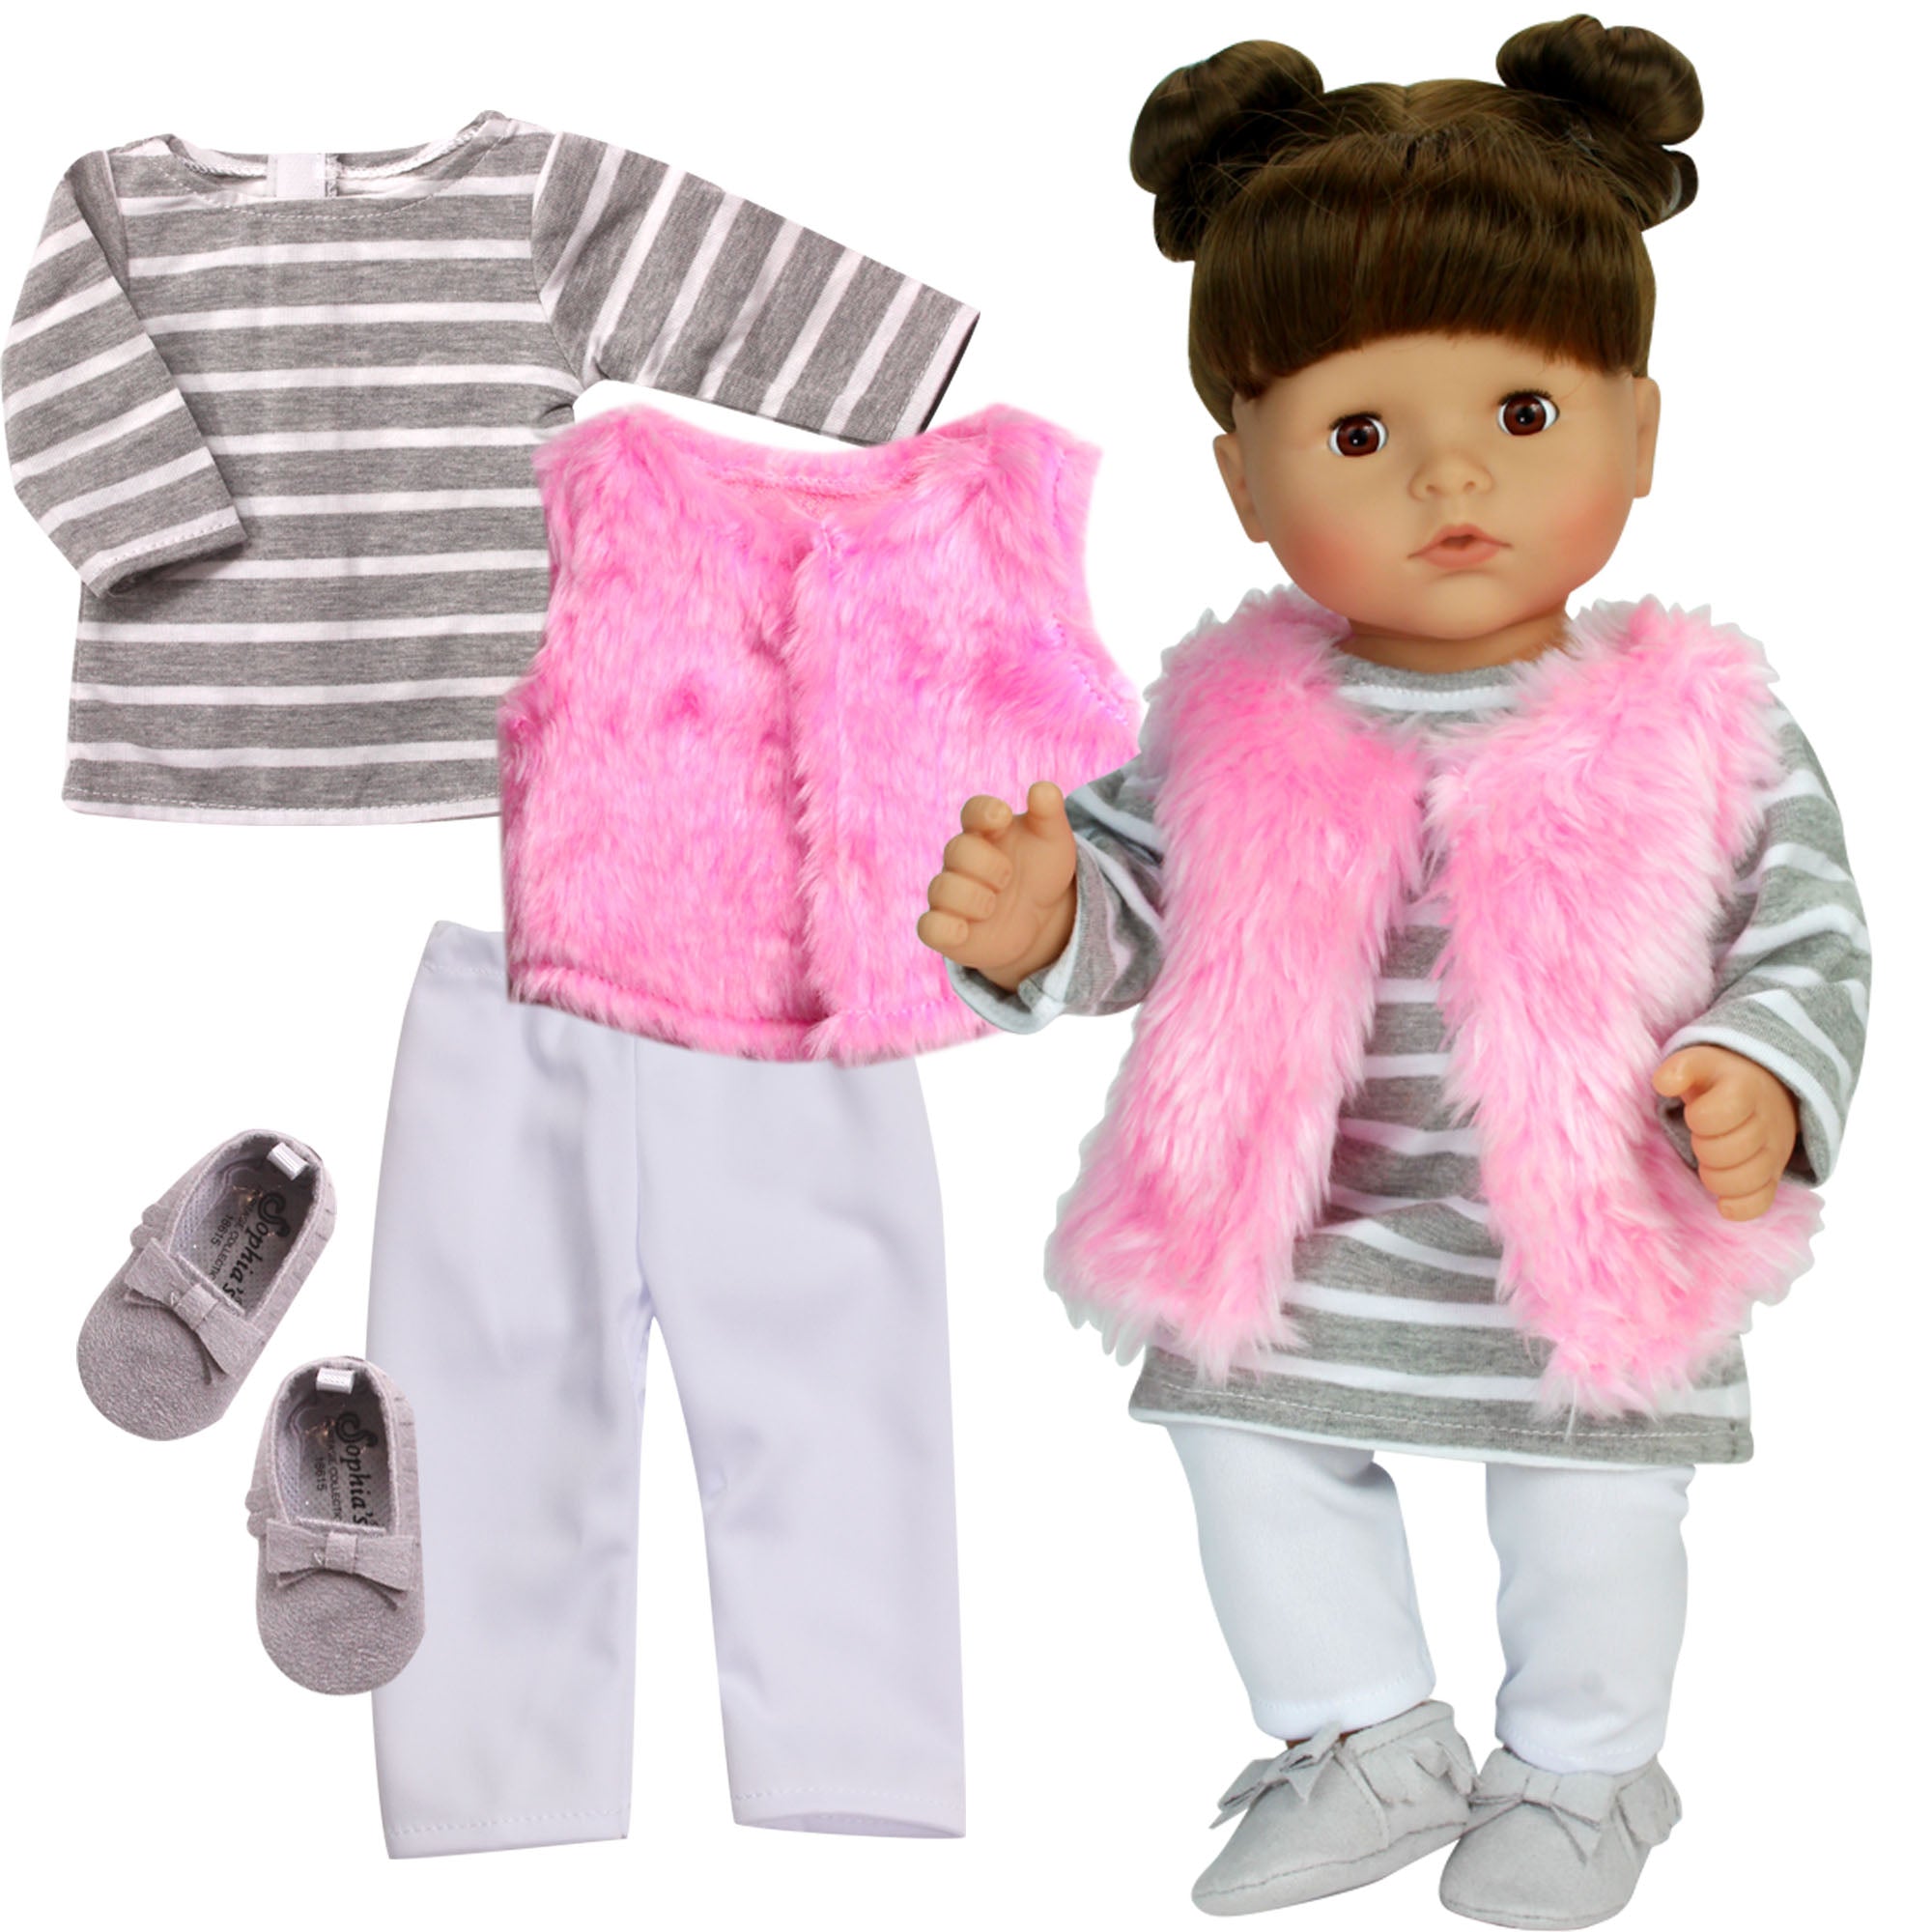 Sophia's 4 Piece Winter Outfit with Shoes Set for 15'' Dolls, Pink/Gray